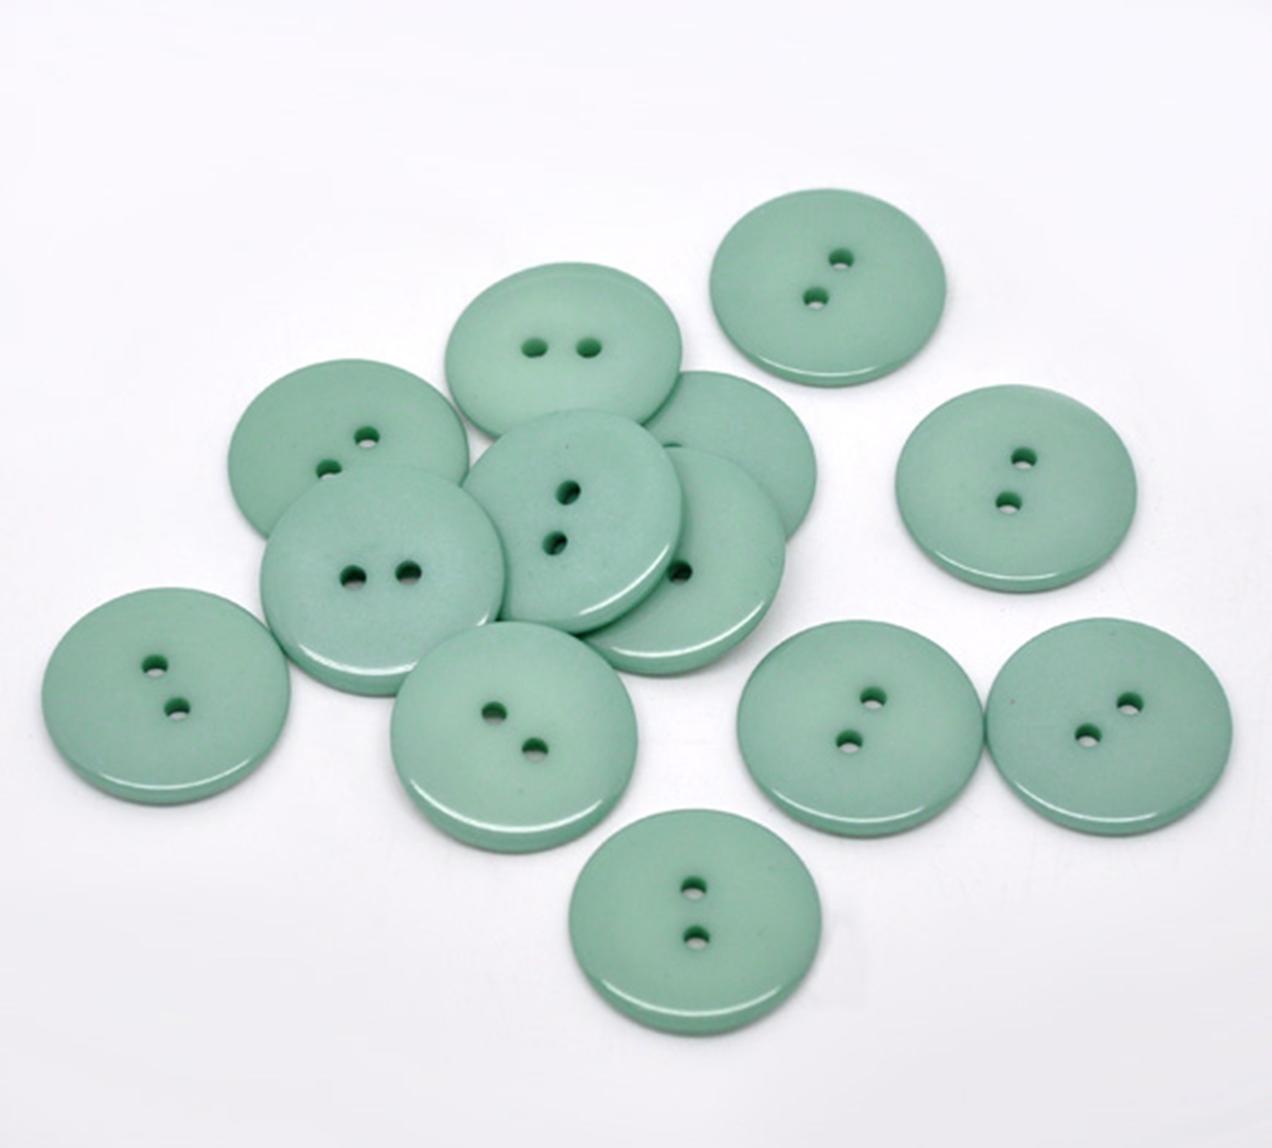 Cyan 23mm round large resin sewing buttons